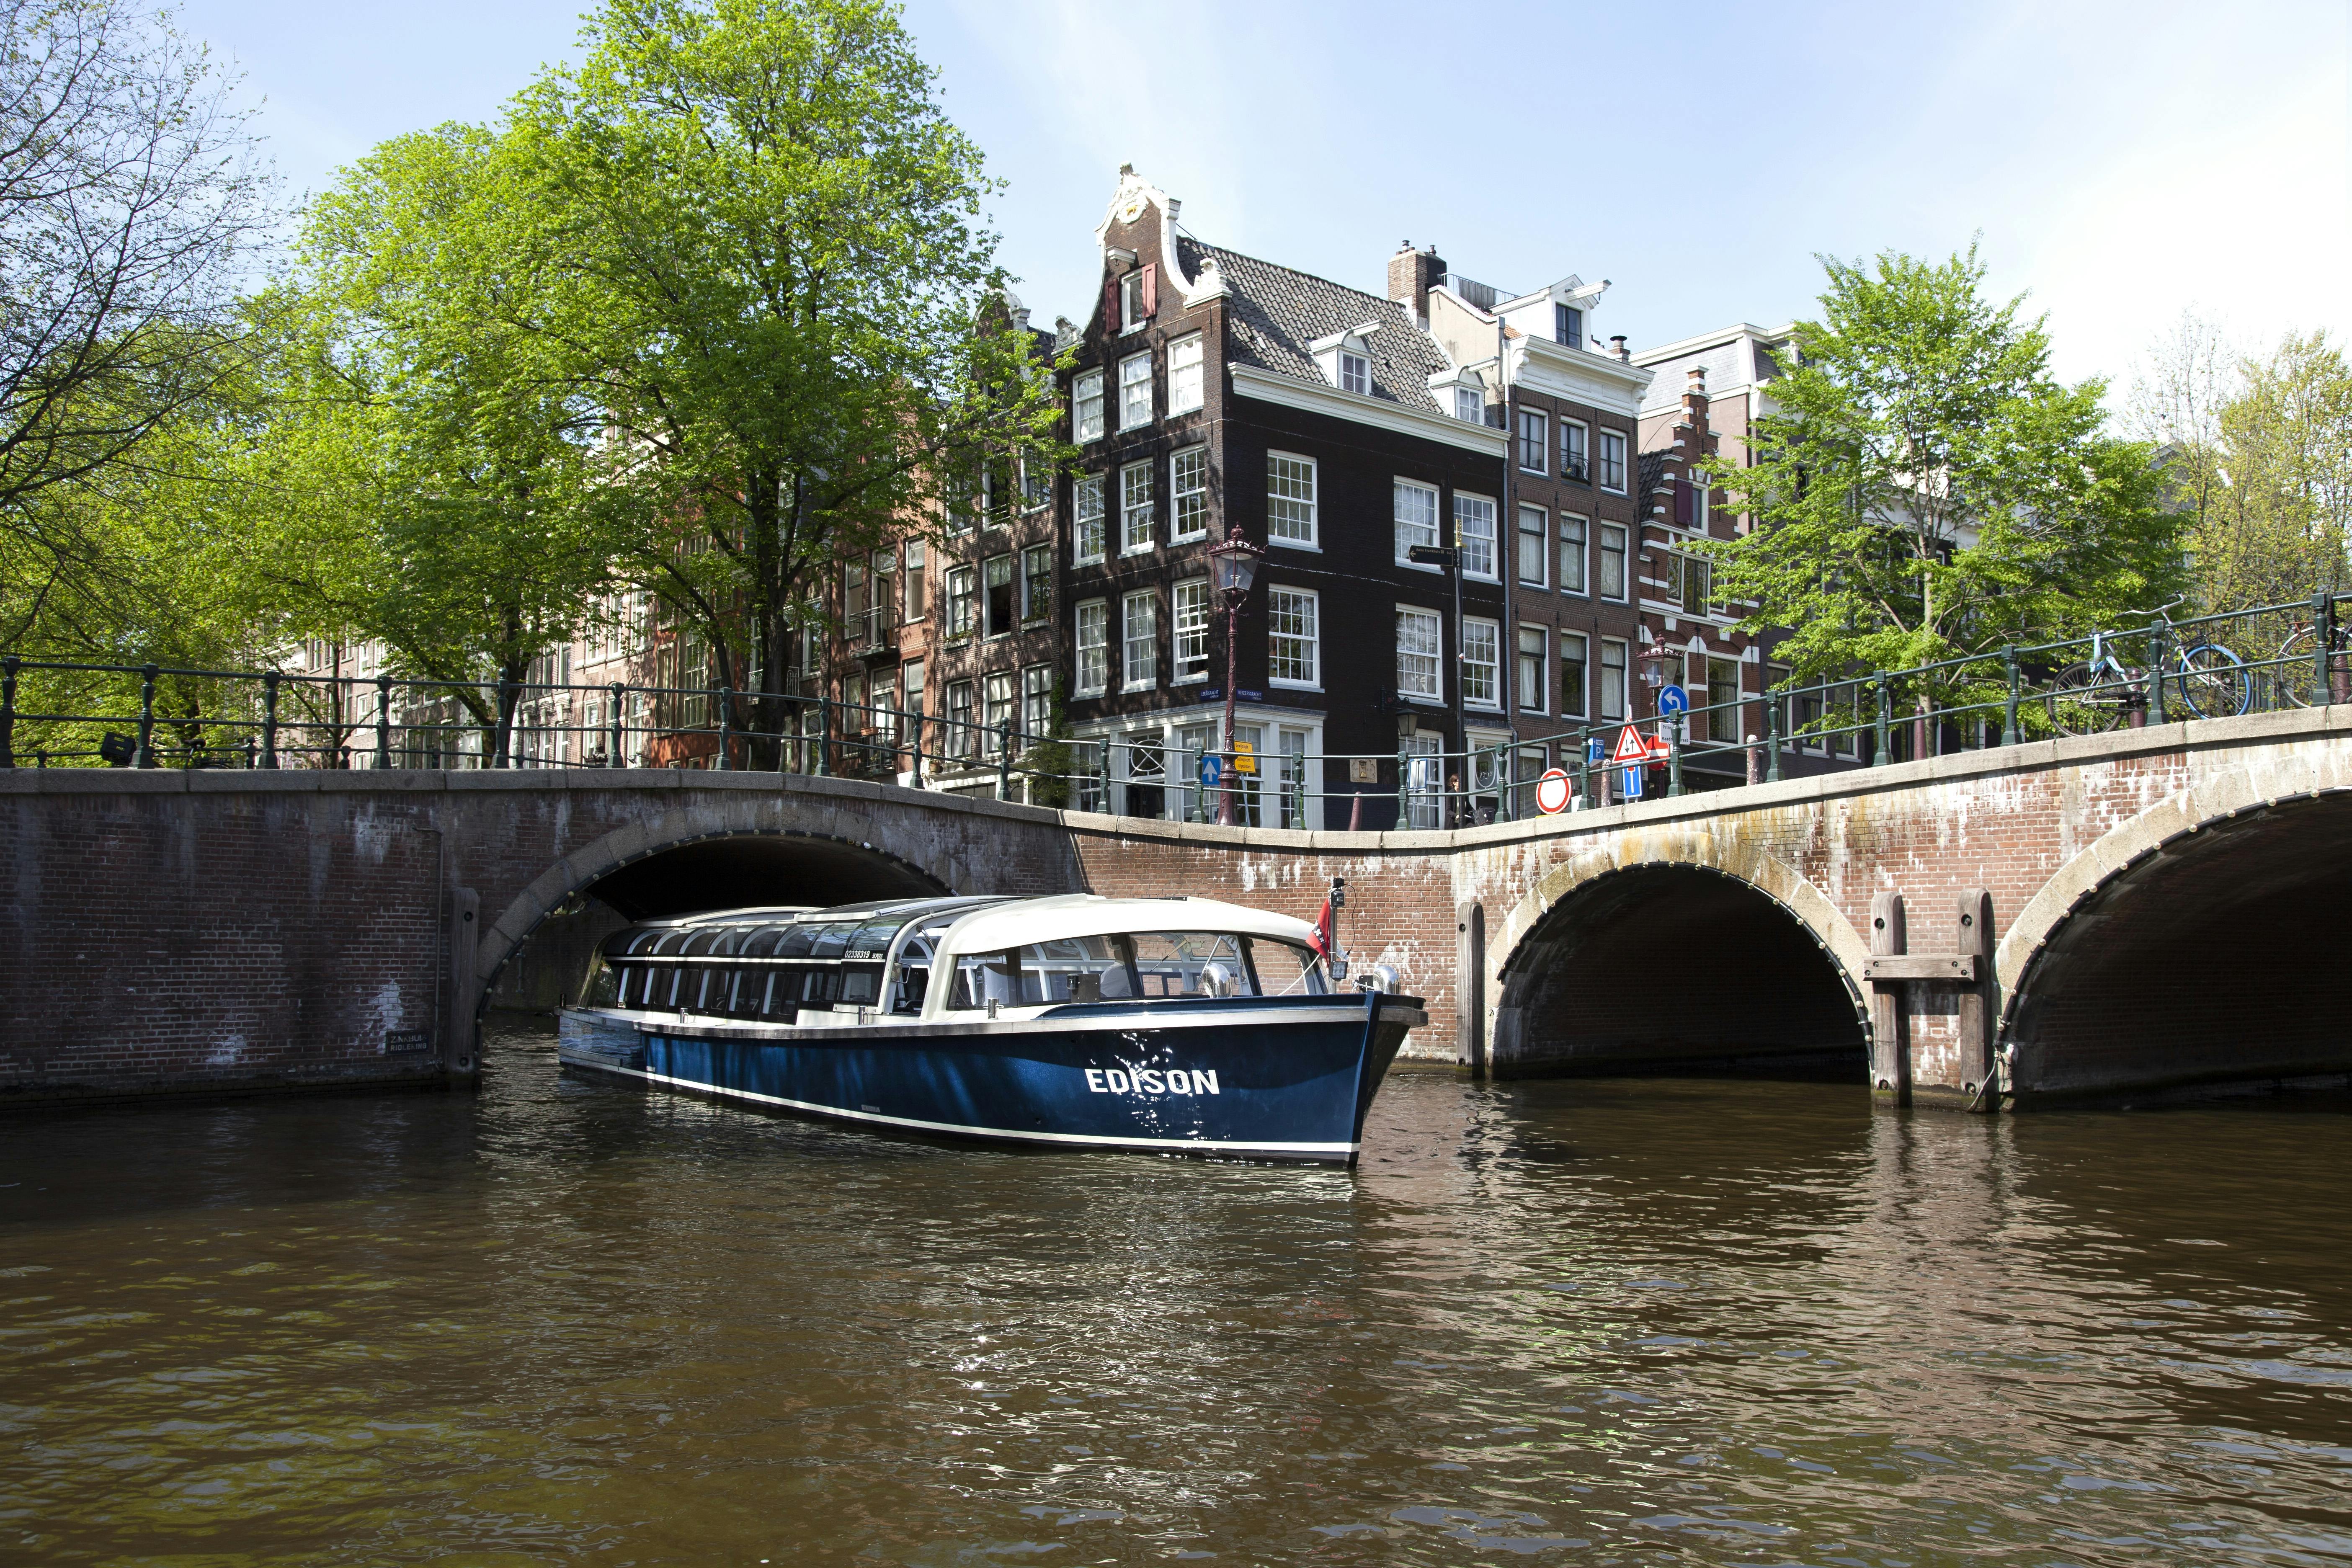 Amsterdam city canal cruise with snack box